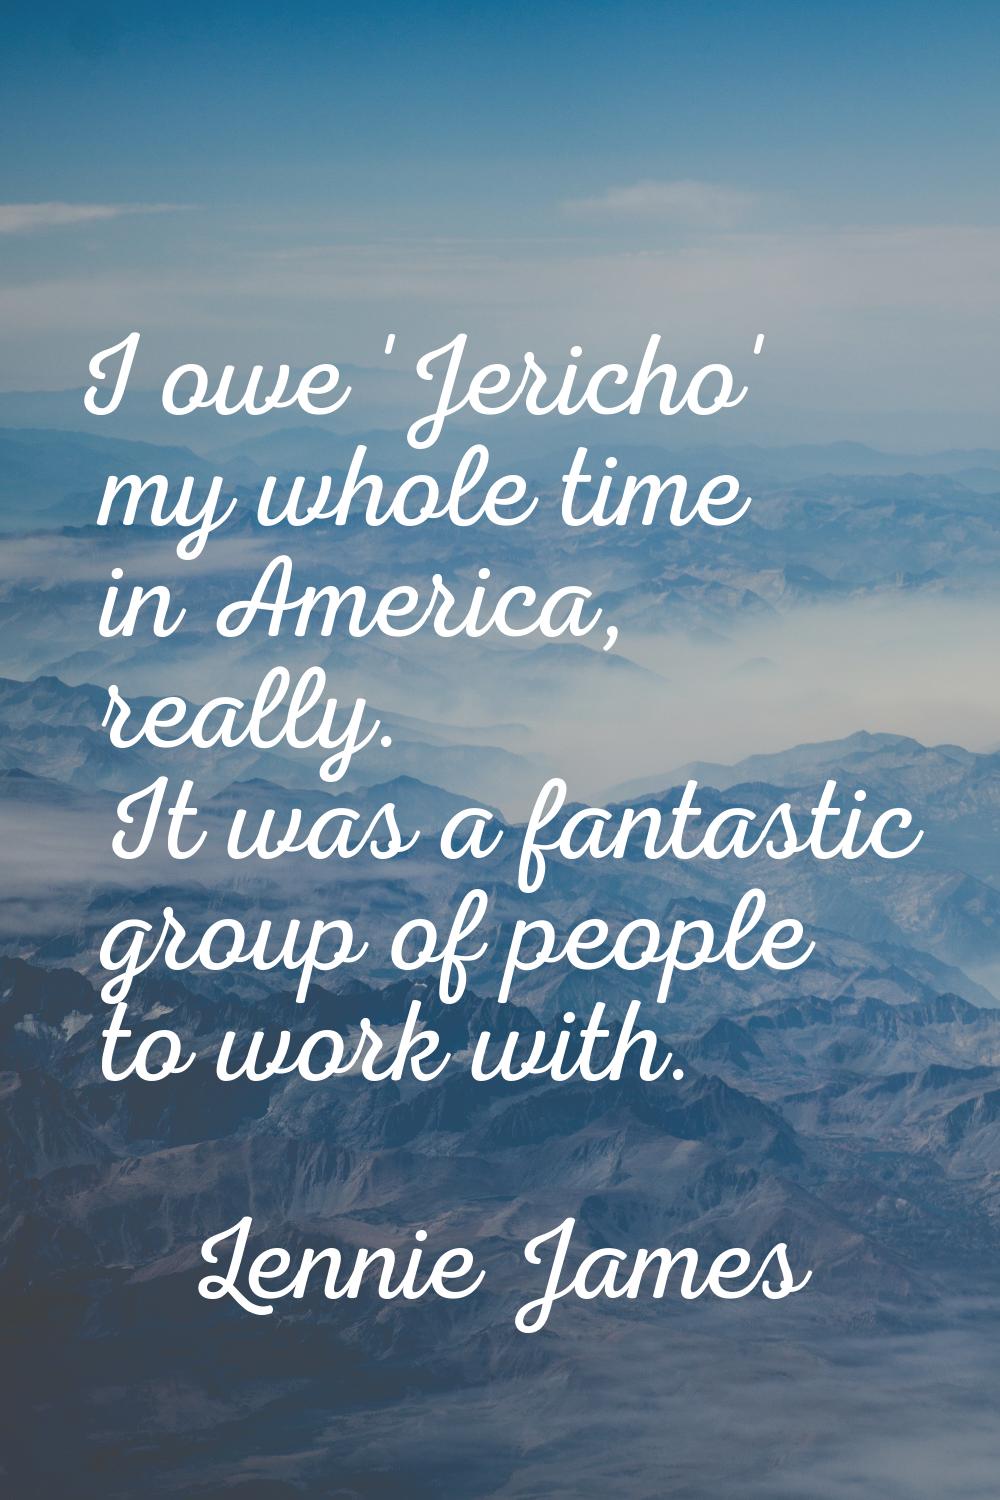 I owe 'Jericho' my whole time in America, really. It was a fantastic group of people to work with.